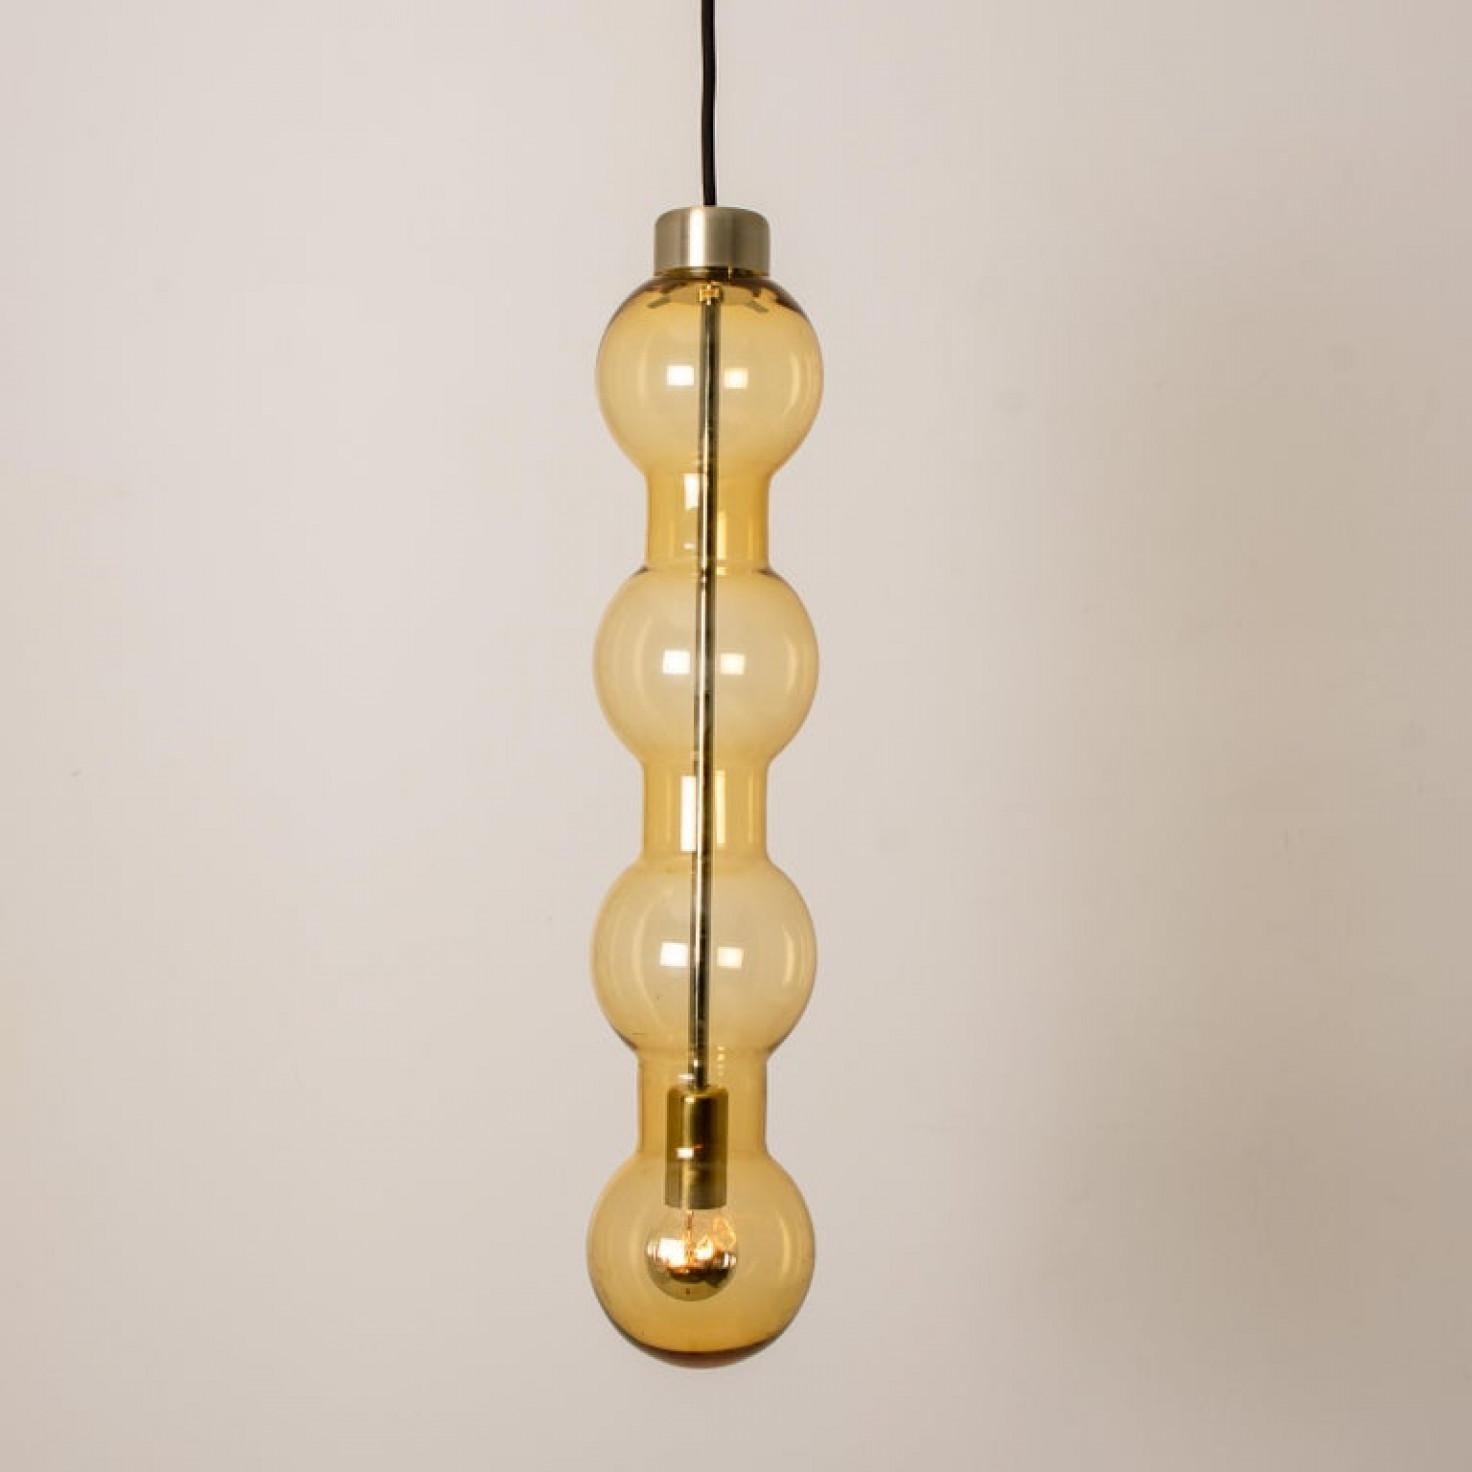 1 of the18 Cascade lamps in a bubble design, model 4309, manufactured by Doria. It is suitable especially for high ceilings and lounge areas. The four large glass bubbles create a beautiful lighting effect. We can deliver the fixture with cord or